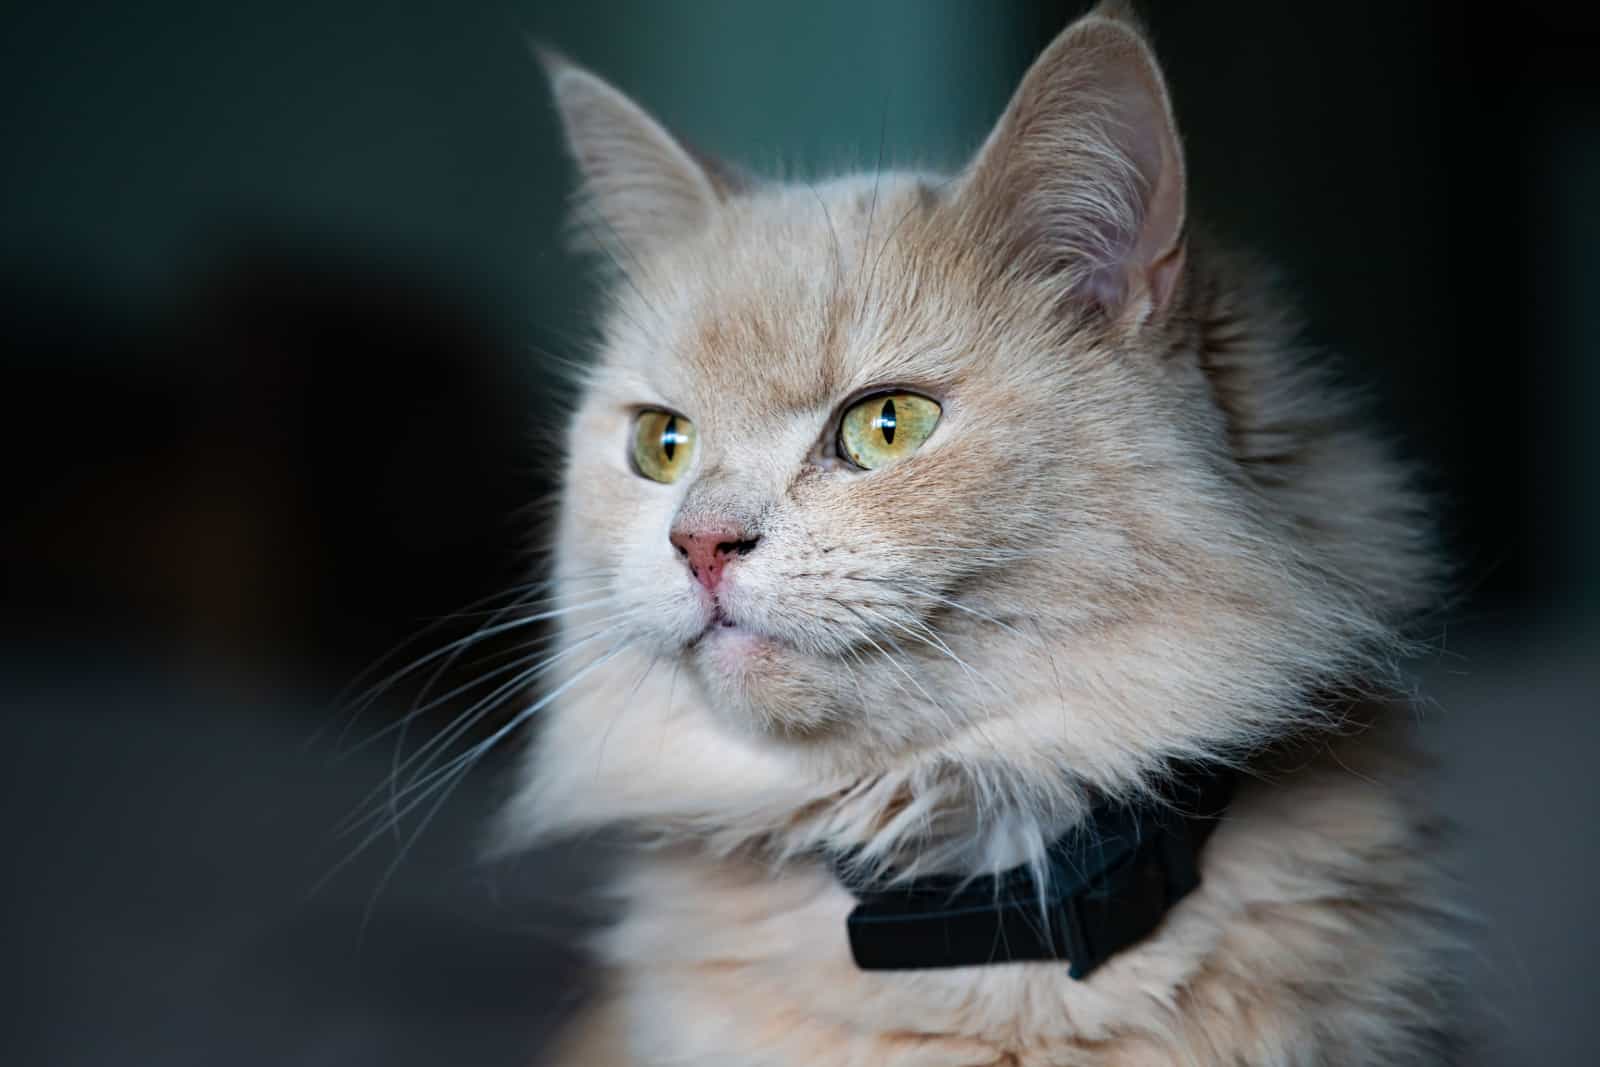 A close up photo of an Extremely fluffy cat wearing a flea collar